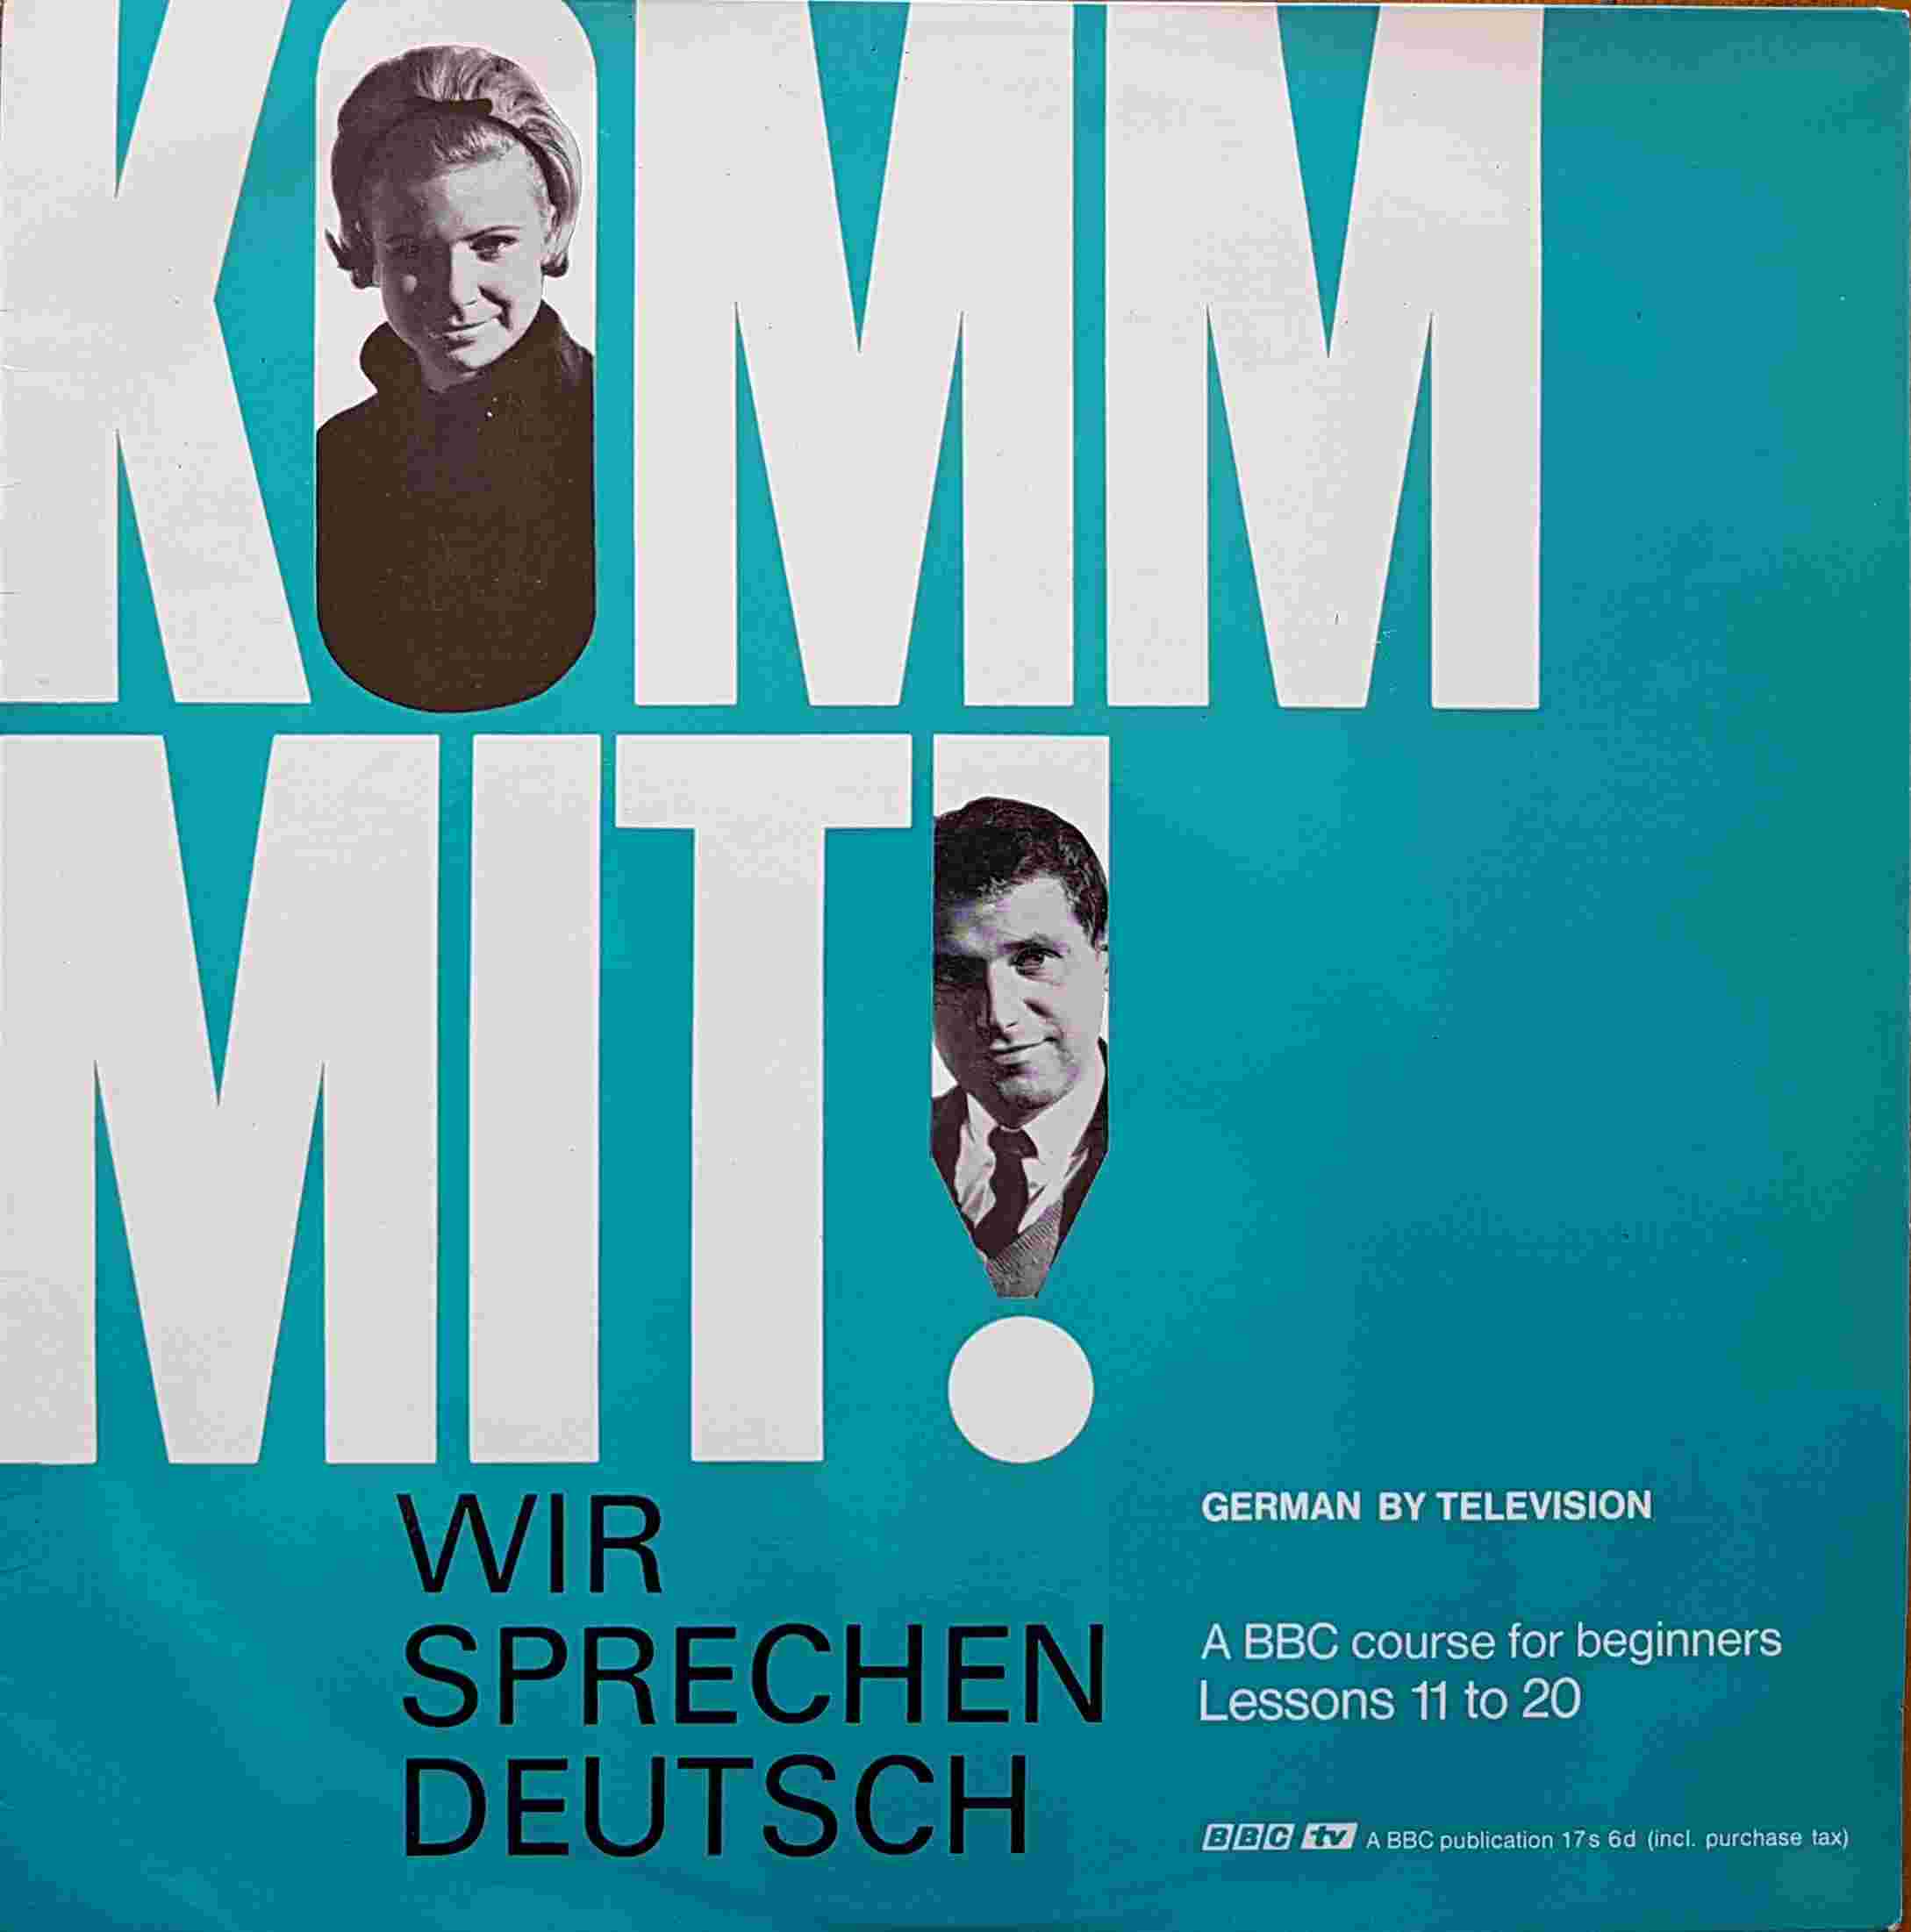 Picture of Komm mit! Wir sprechen Deutsch - A BBC course for beginners lessons 11 - 20 by artist John L. M. Trim / Frank Kuna from the BBC albums - Records and Tapes library